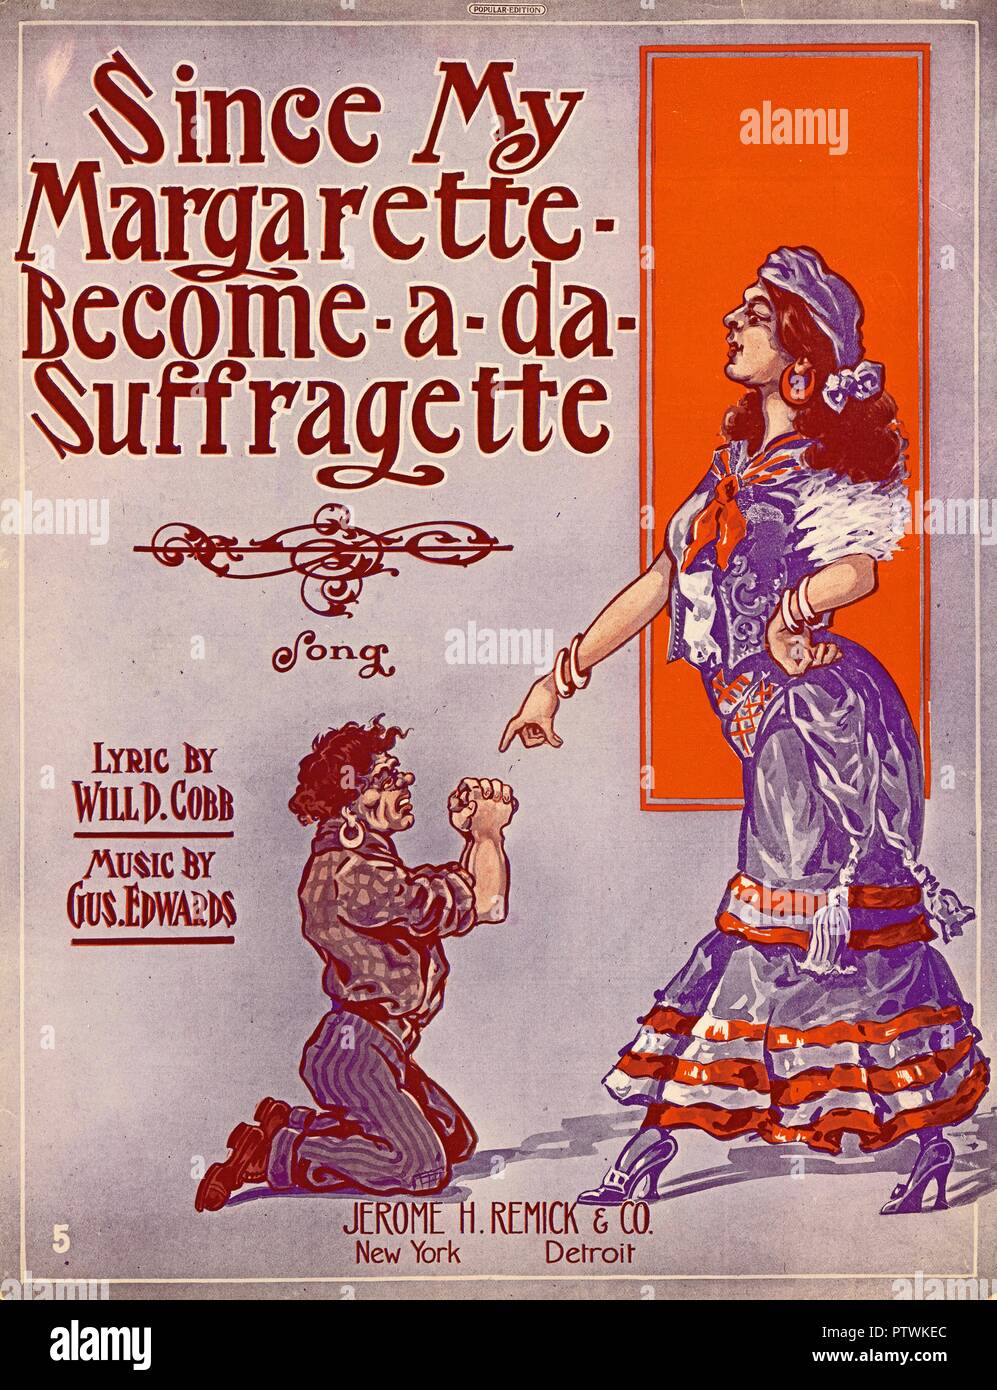 Sheet music cover for Will D Cobb and Gus Edwards' satirical song 'Since My Margarette Become-a-da Suffragette,' with an illustration of a man, kneeling in a supplicating pose before a woman, each dressed in a style suggesting that they are recent emigres from southern Europe, published in New York and Detroit, by Jerome H Remick and Company, for the American market, 1900. () Stock Photo